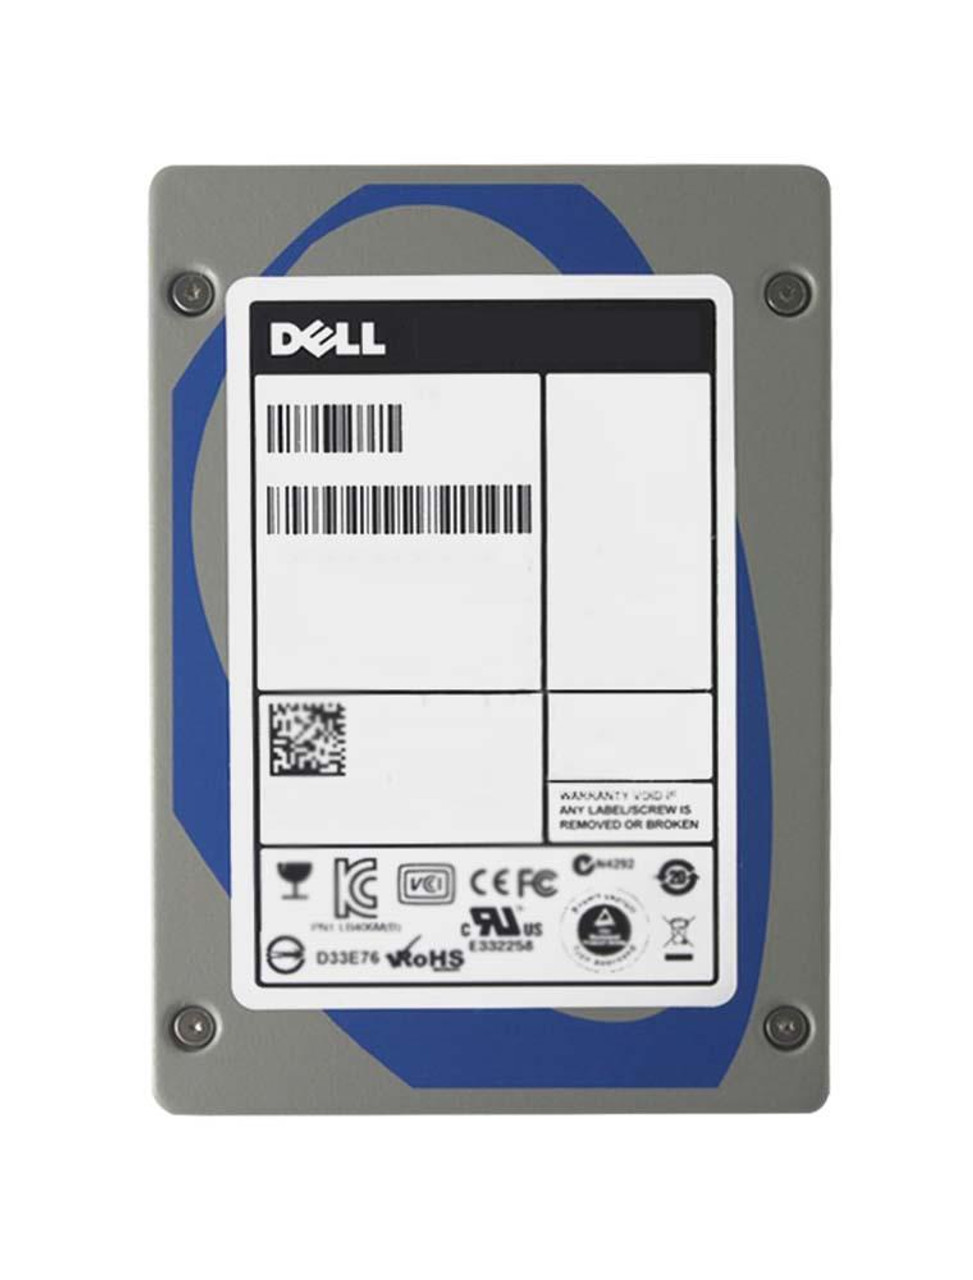 CRMTG Dell 800GB MLC SATA 6Gbps Hot Swap 2.5-inch Internal Solid State Drive (SSD)